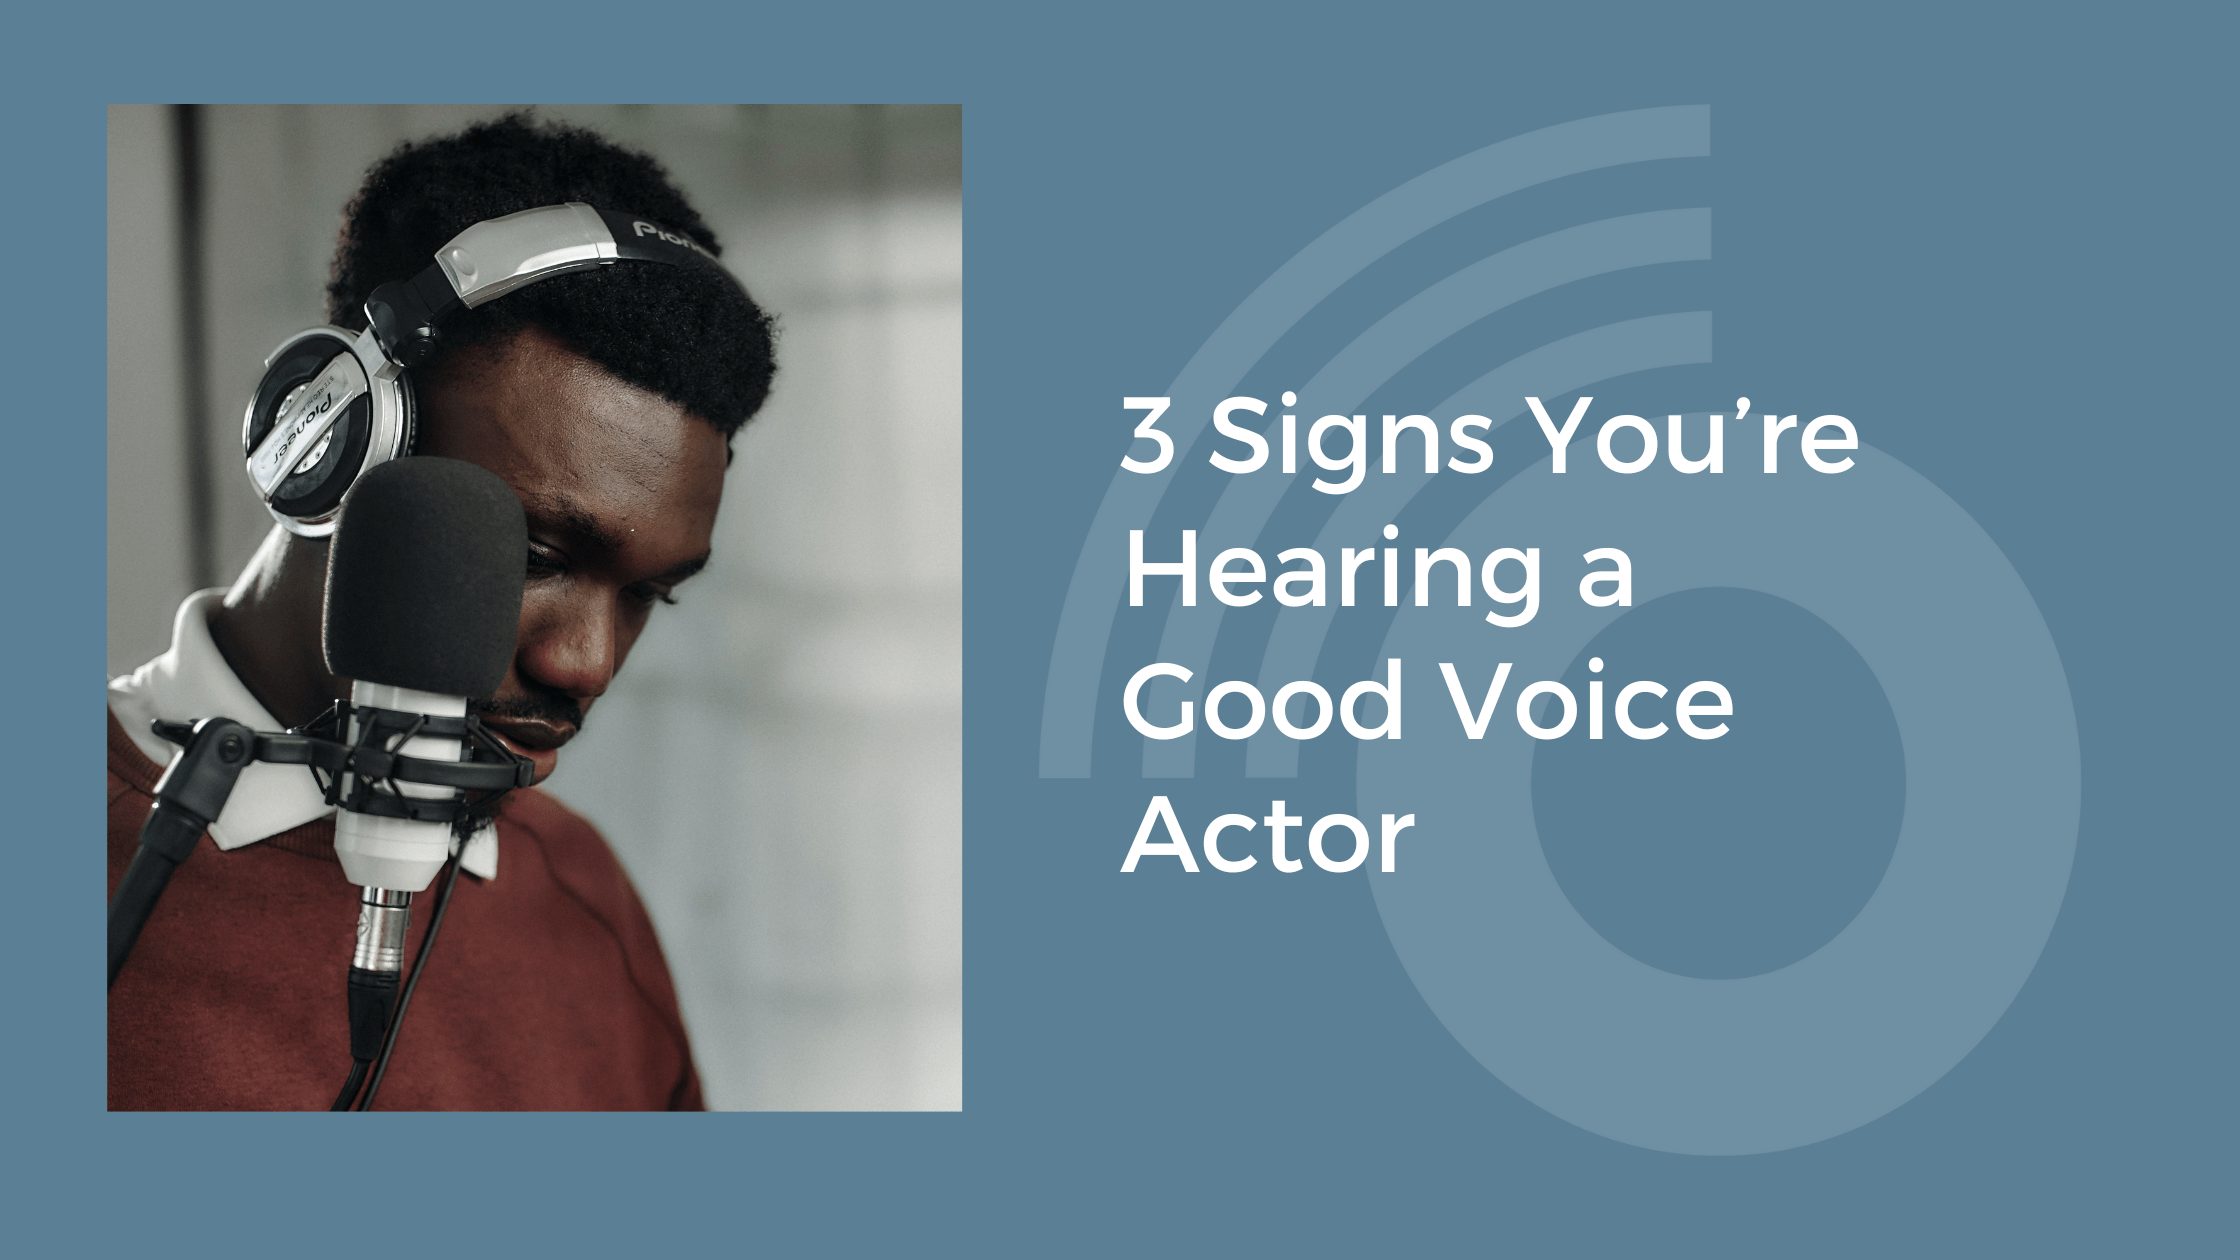 3 Signs You’re Hearing A Good Voice Actor